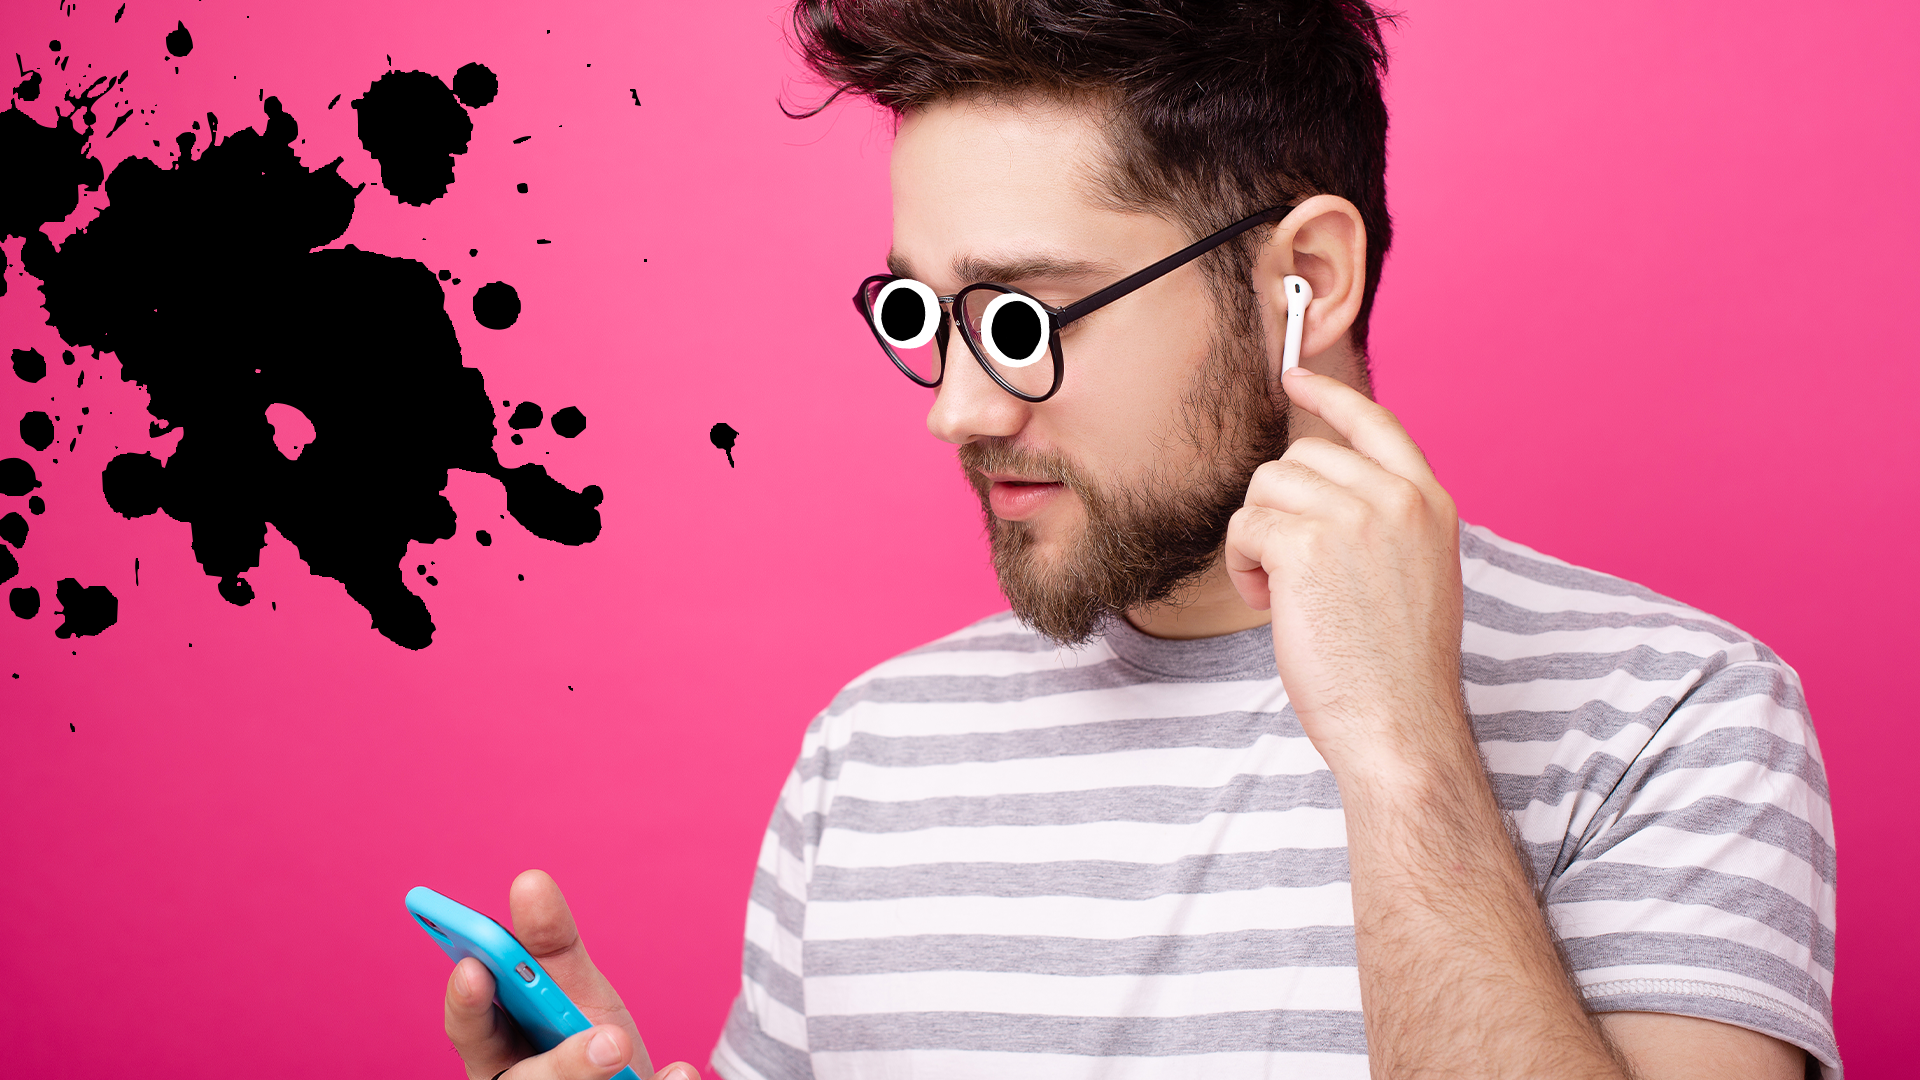 Man with airpods on pink background with splat